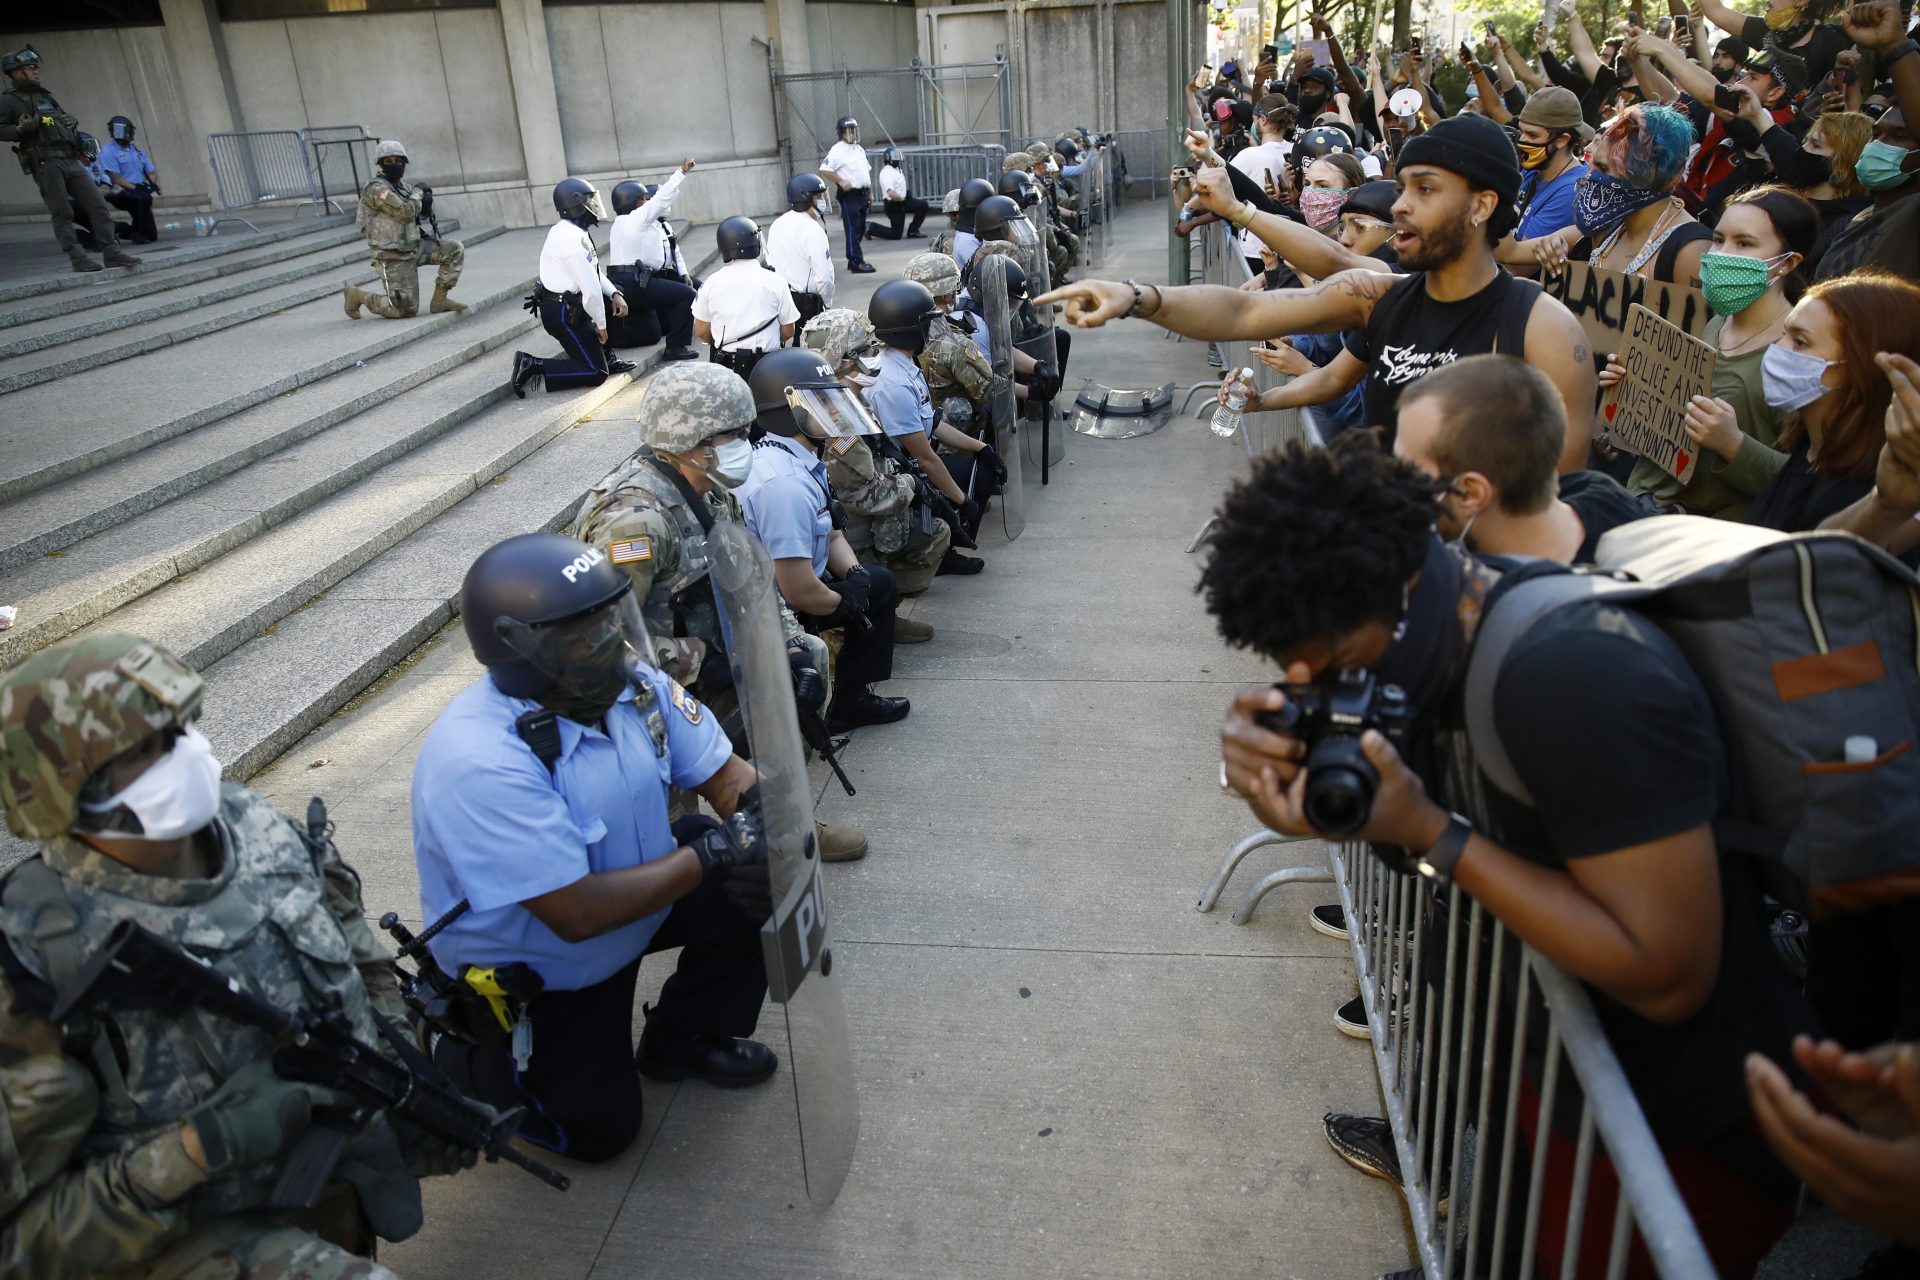 Philadelphia police and National Guard take a knee at the suggestion of Philadelphia Police Deputy Commissioner Melvin Singleton, unseen, outside Philadelphia Police headquarters in Philadelphia, Monday, June 1, 2020 during a march calling for justice over the death of George Floyd, Floyd died after being restrained by Minneapolis police officers on May 25.